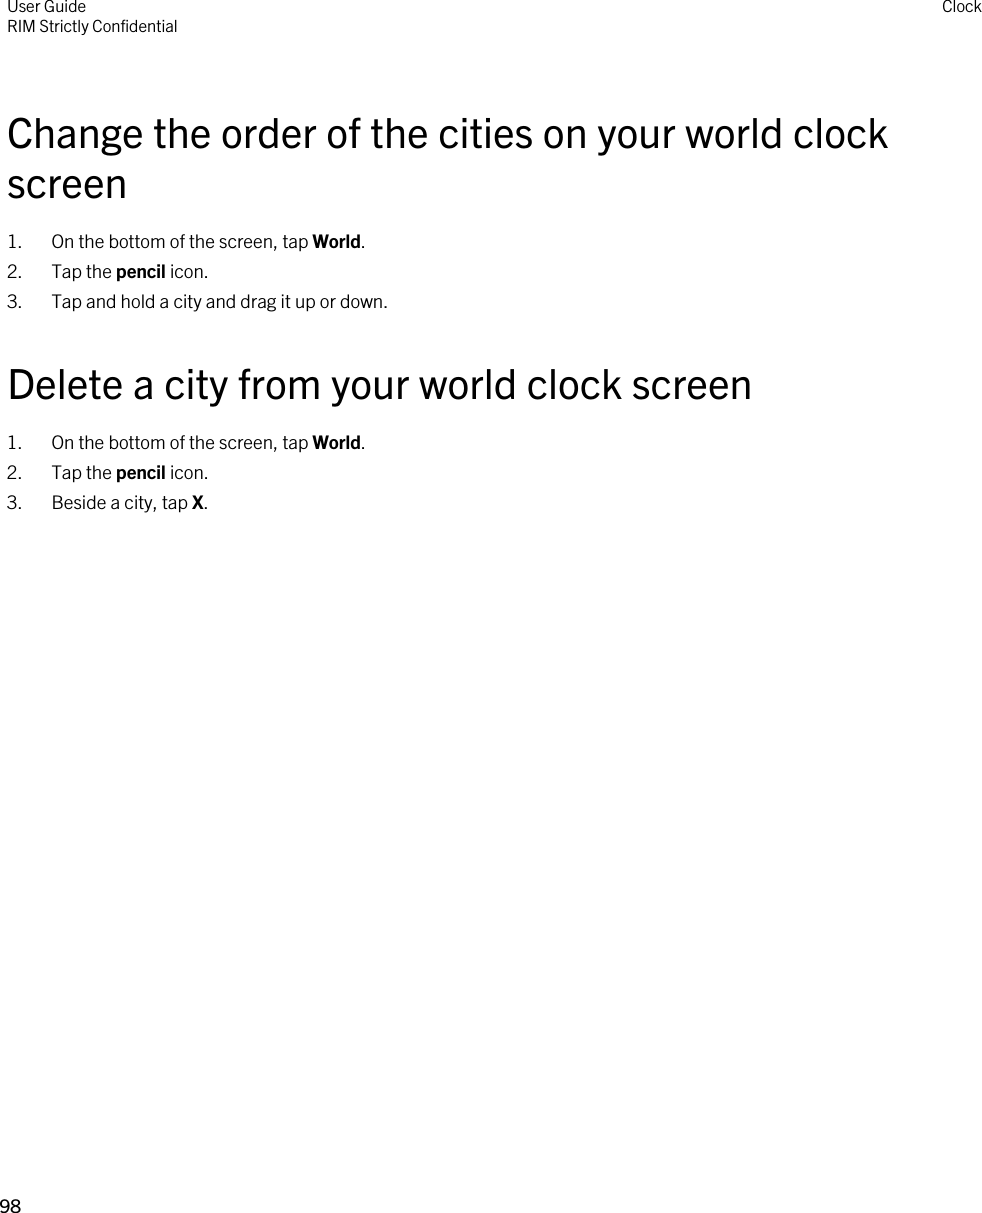 Change the order of the cities on your world clock screen1. On the bottom of the screen, tap World.2. Tap the pencil icon.3. Tap and hold a city and drag it up or down.Delete a city from your world clock screen1. On the bottom of the screen, tap World.2. Tap the pencil icon.3. Beside a city, tap X.User GuideRIM Strictly ConfidentialClock98 